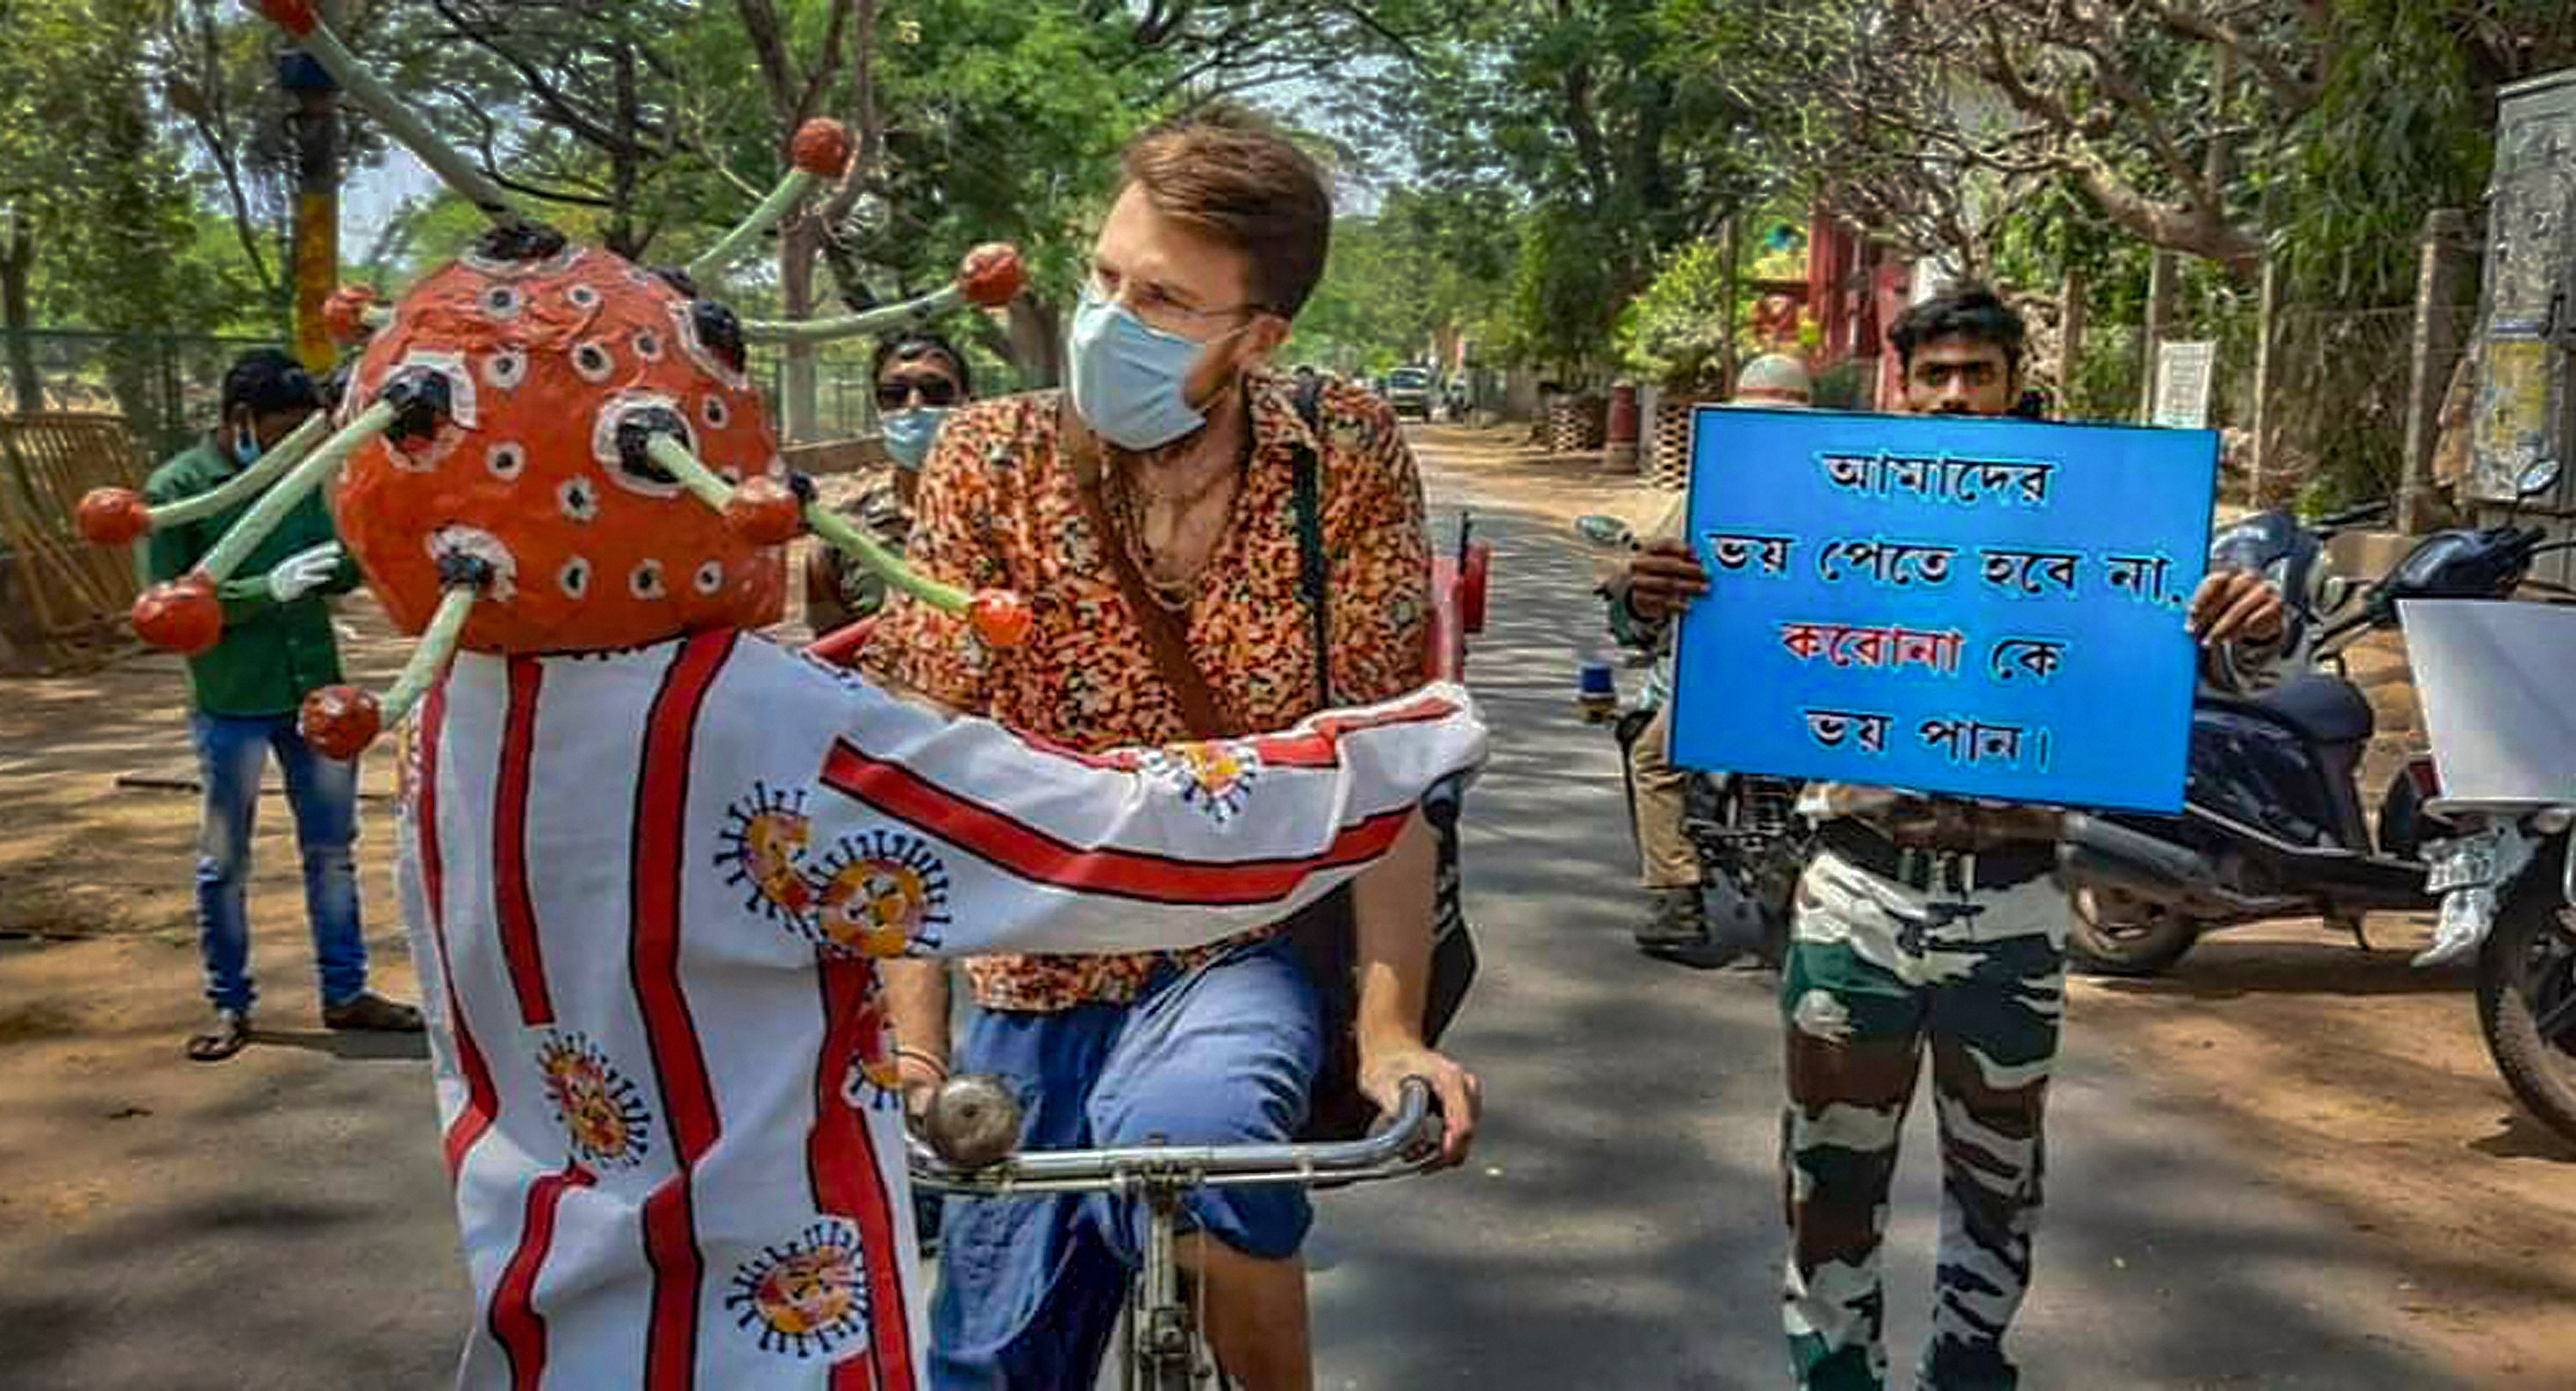 An artist dressed as coronavirus creates awareness about COVID-19 among foreign tourists during a government-imposed nationwide lockdown. (PTI Photo)